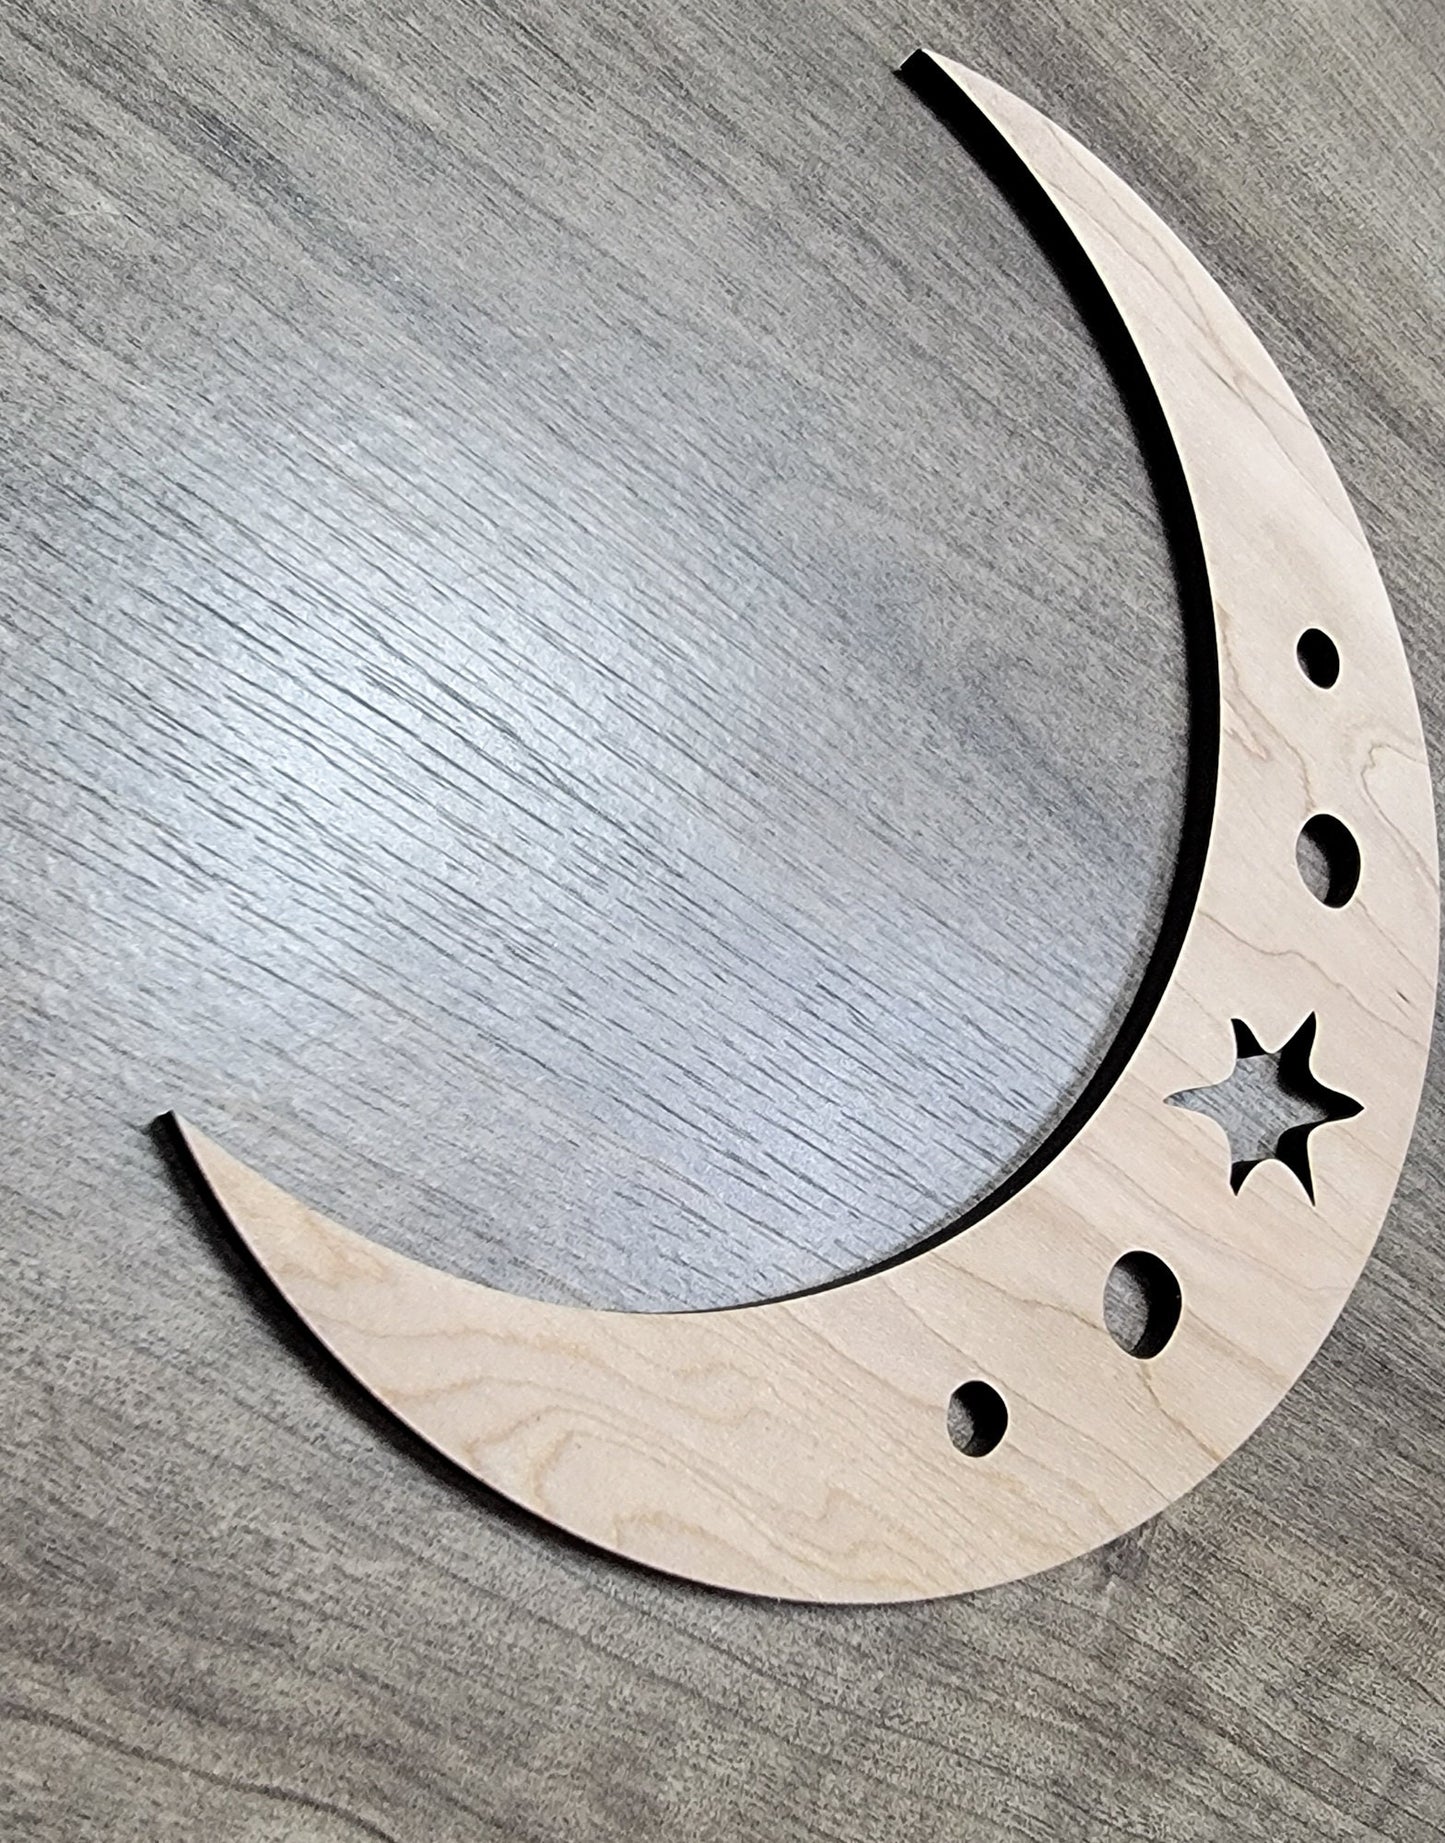 Crescent Moon & Star Wood Shape Sign, Wooden Moon Shape Blank, Unfinished Cut out, Crafts DIY for Sign Making, Boho Decor theme Natural 001